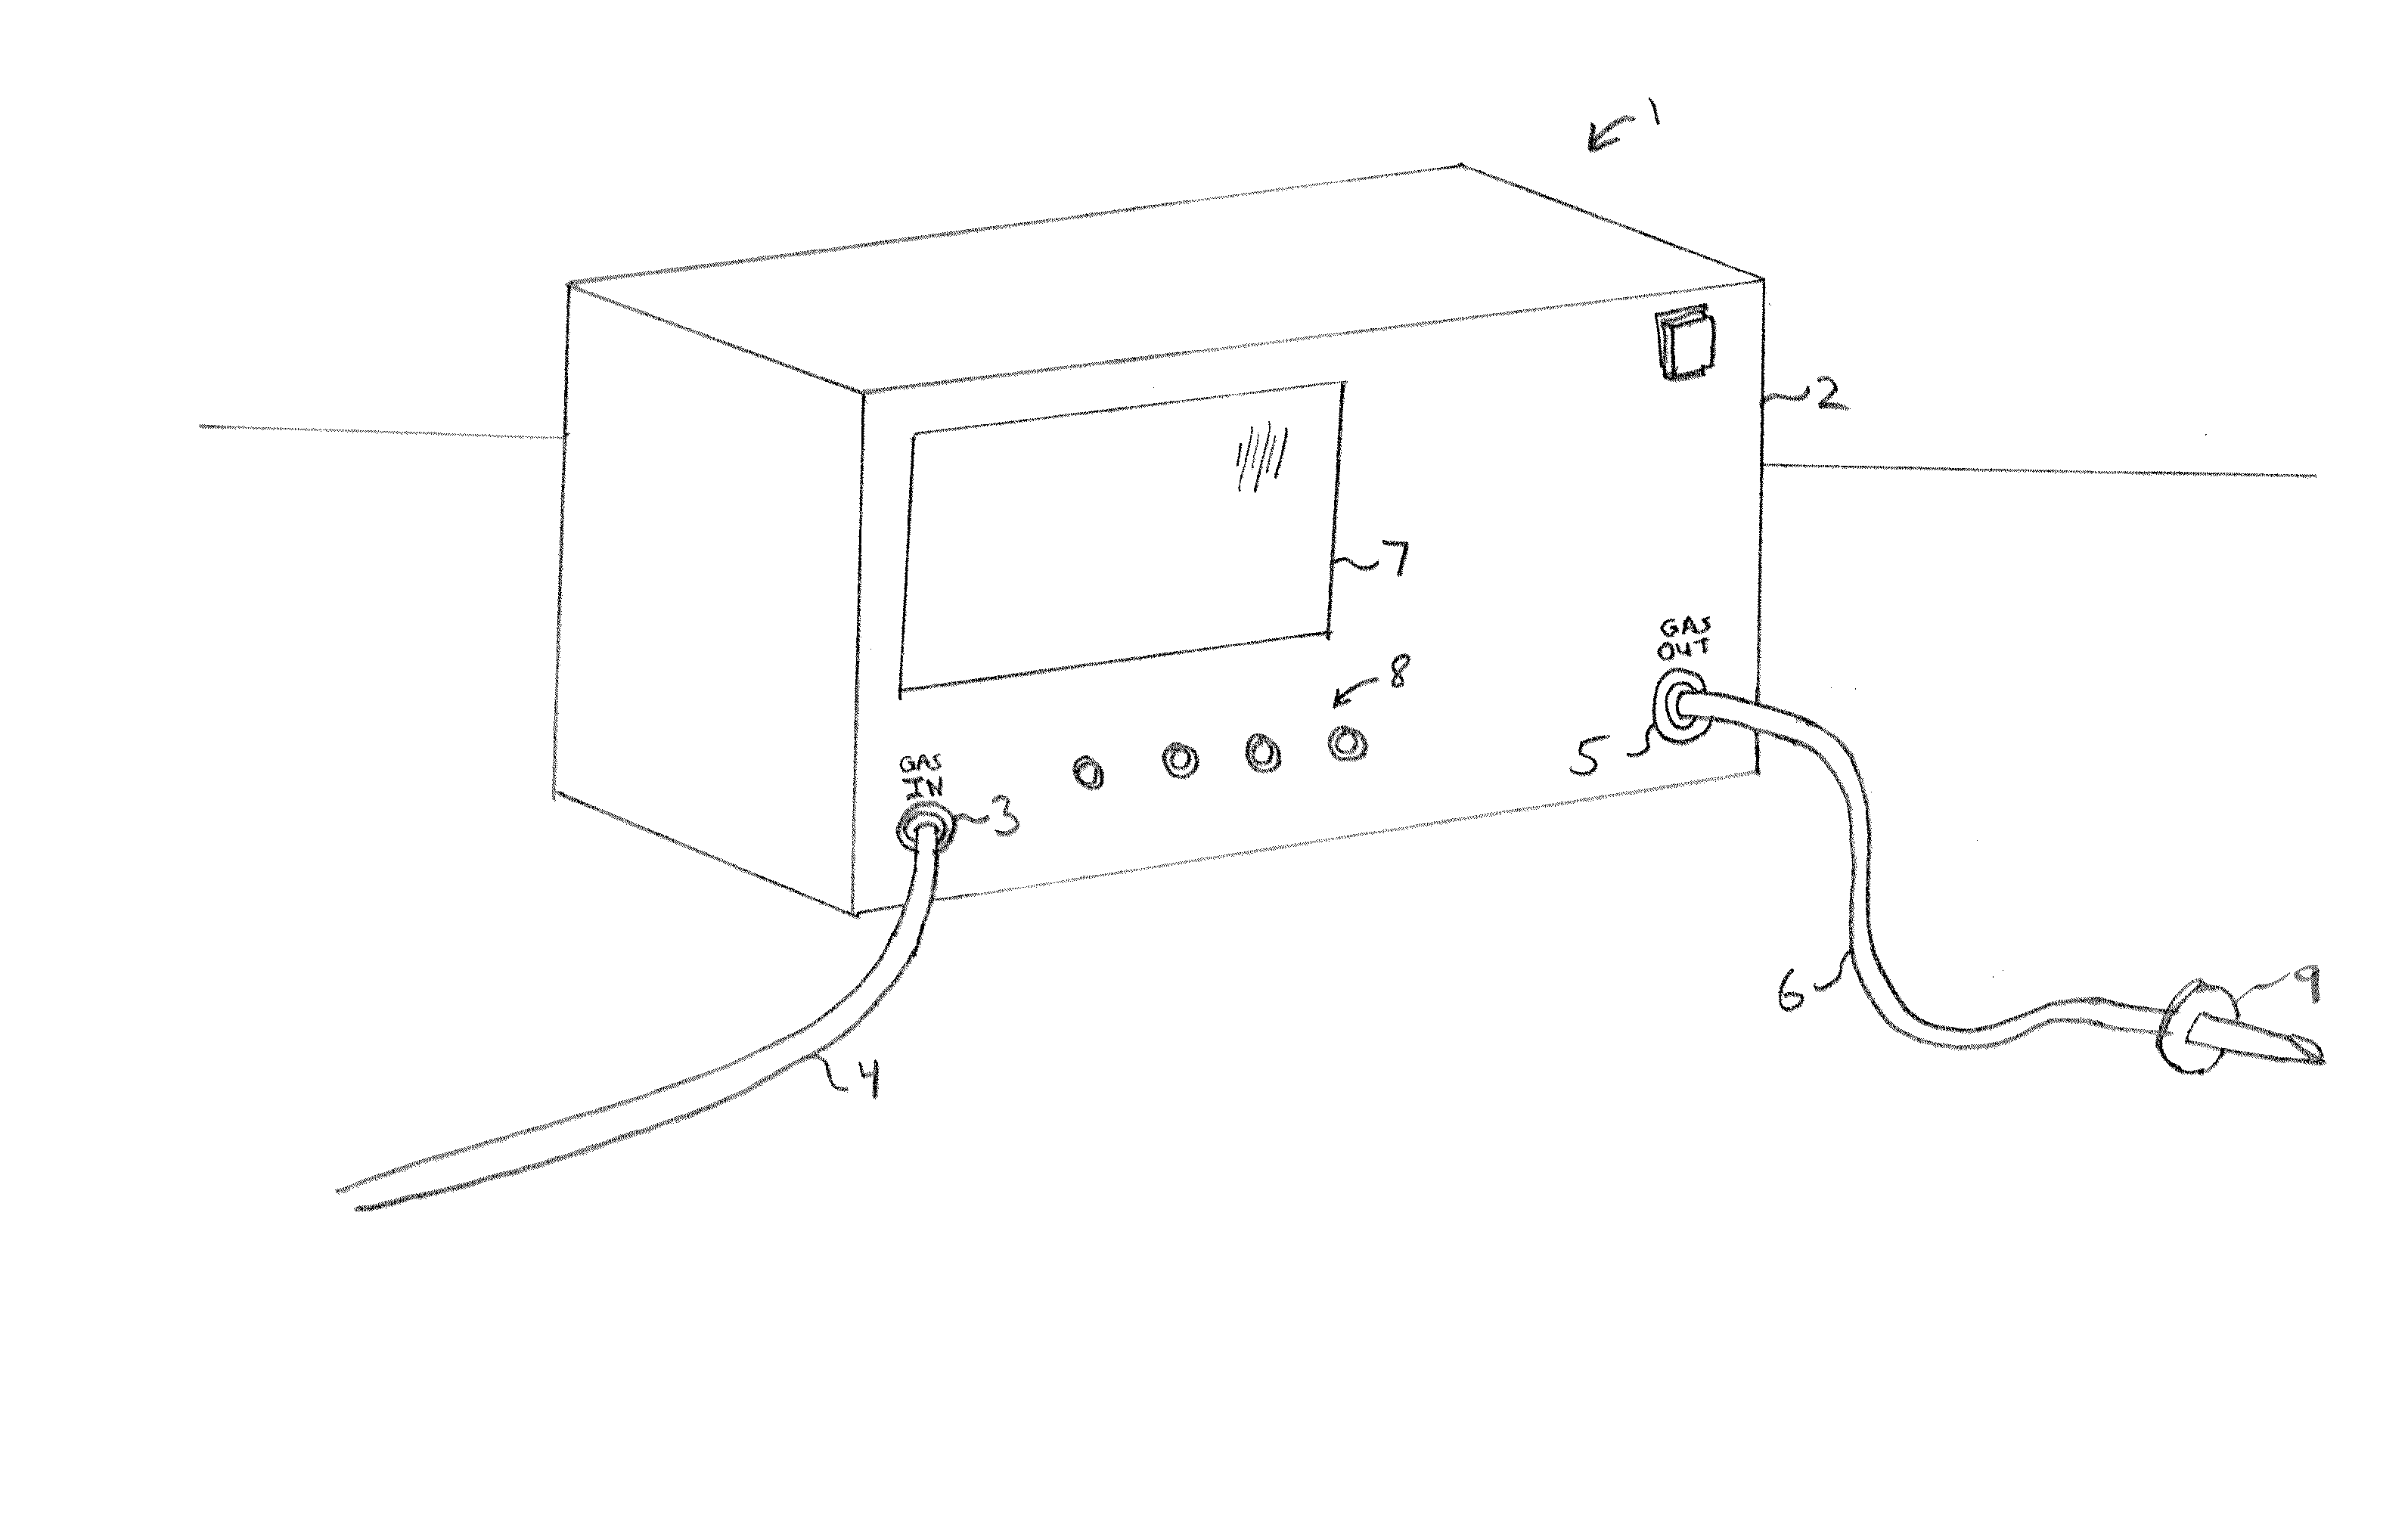 Method and Apparatus to Detect Biocontamination in an Insufflator for use in Endoscopy